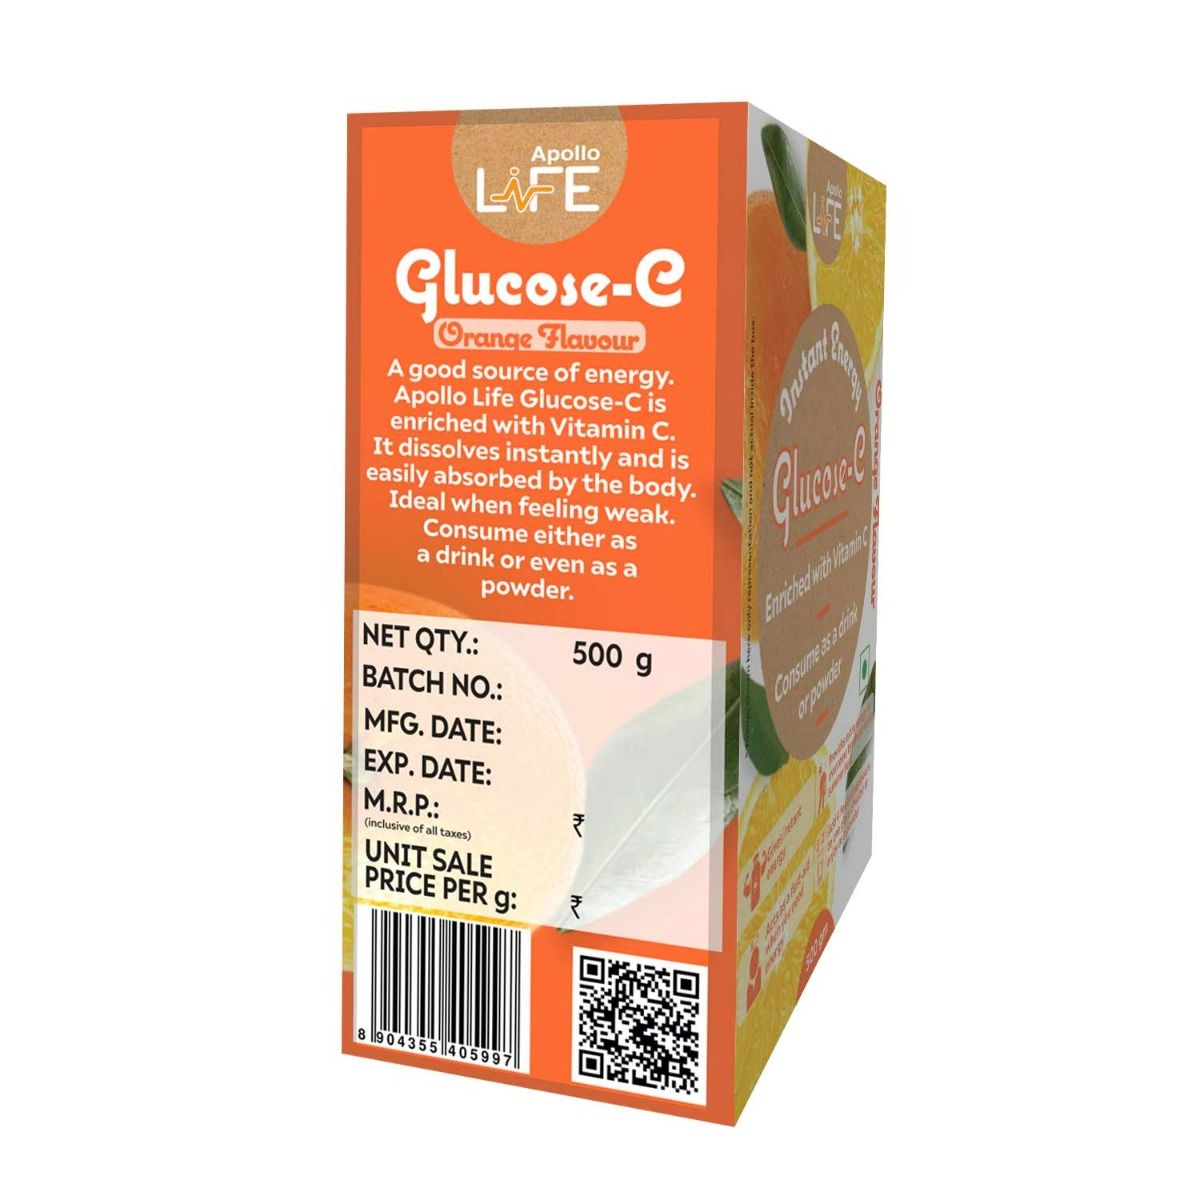 Apollo Life Glucose-D Orange Flavour Instant Energy Drink, 500 gm Refill Pack, Pack of 1 